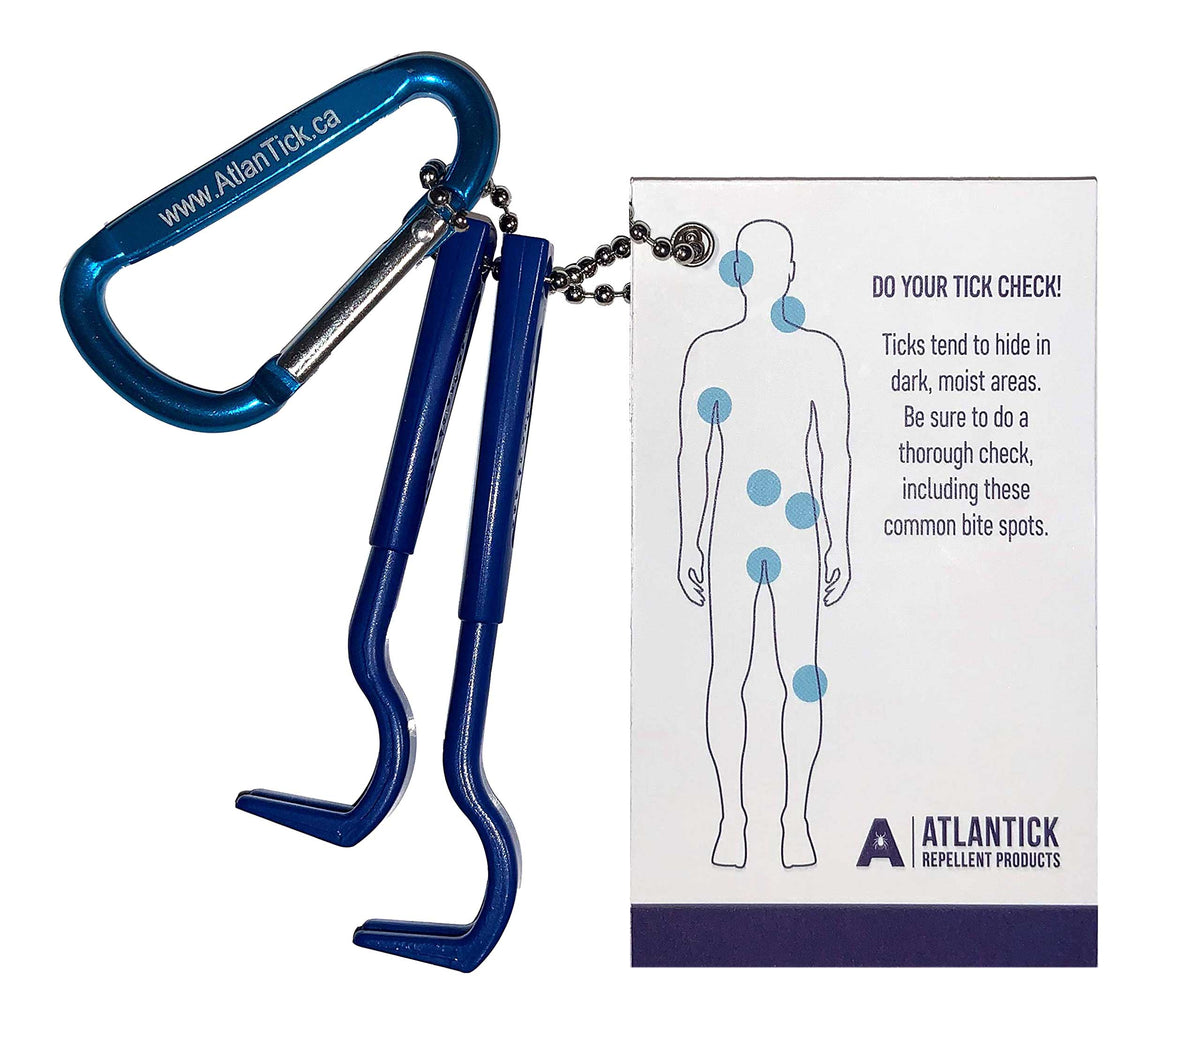 AtlanTick TickPick® Tick Removal Tool For Pets and Humans